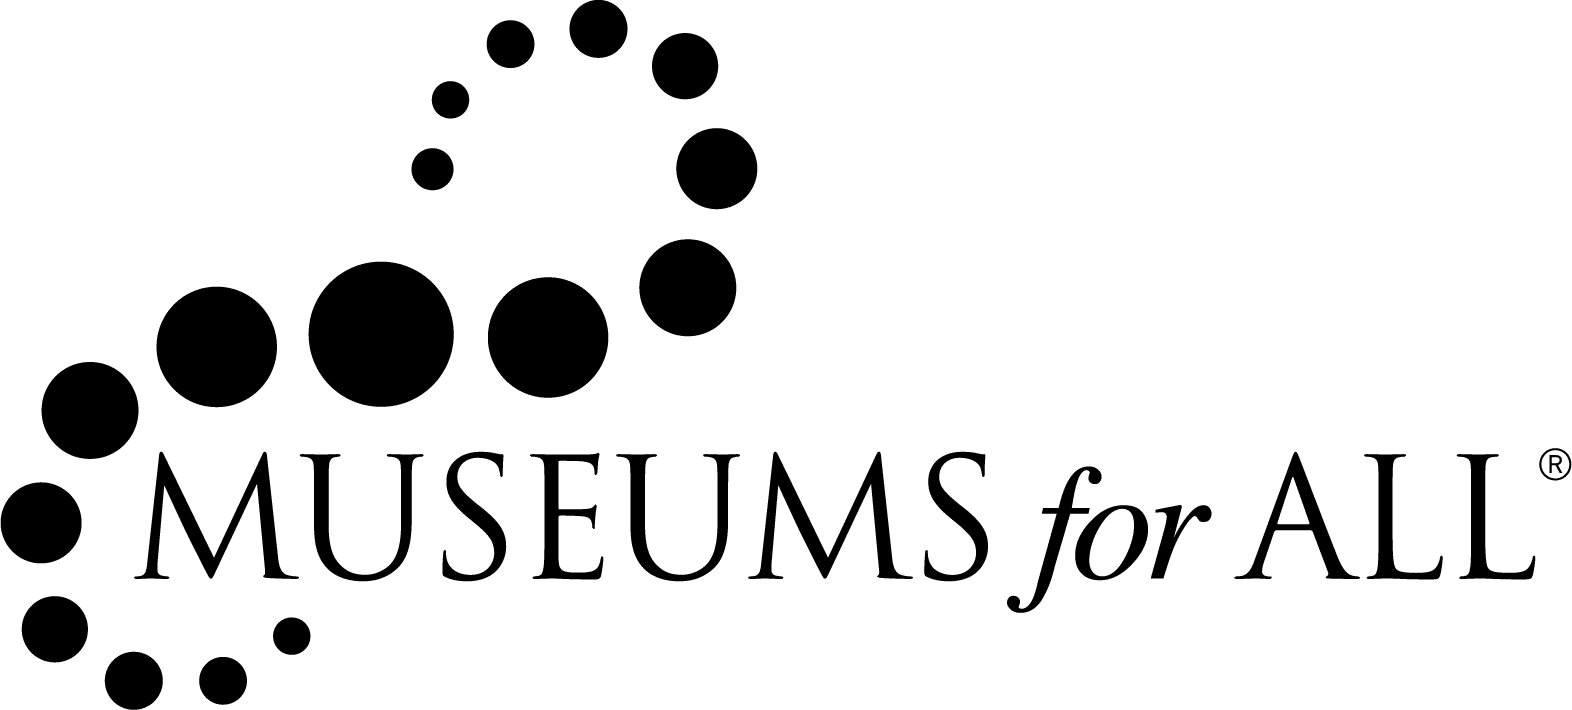 Museums For All Logo Black Copyright